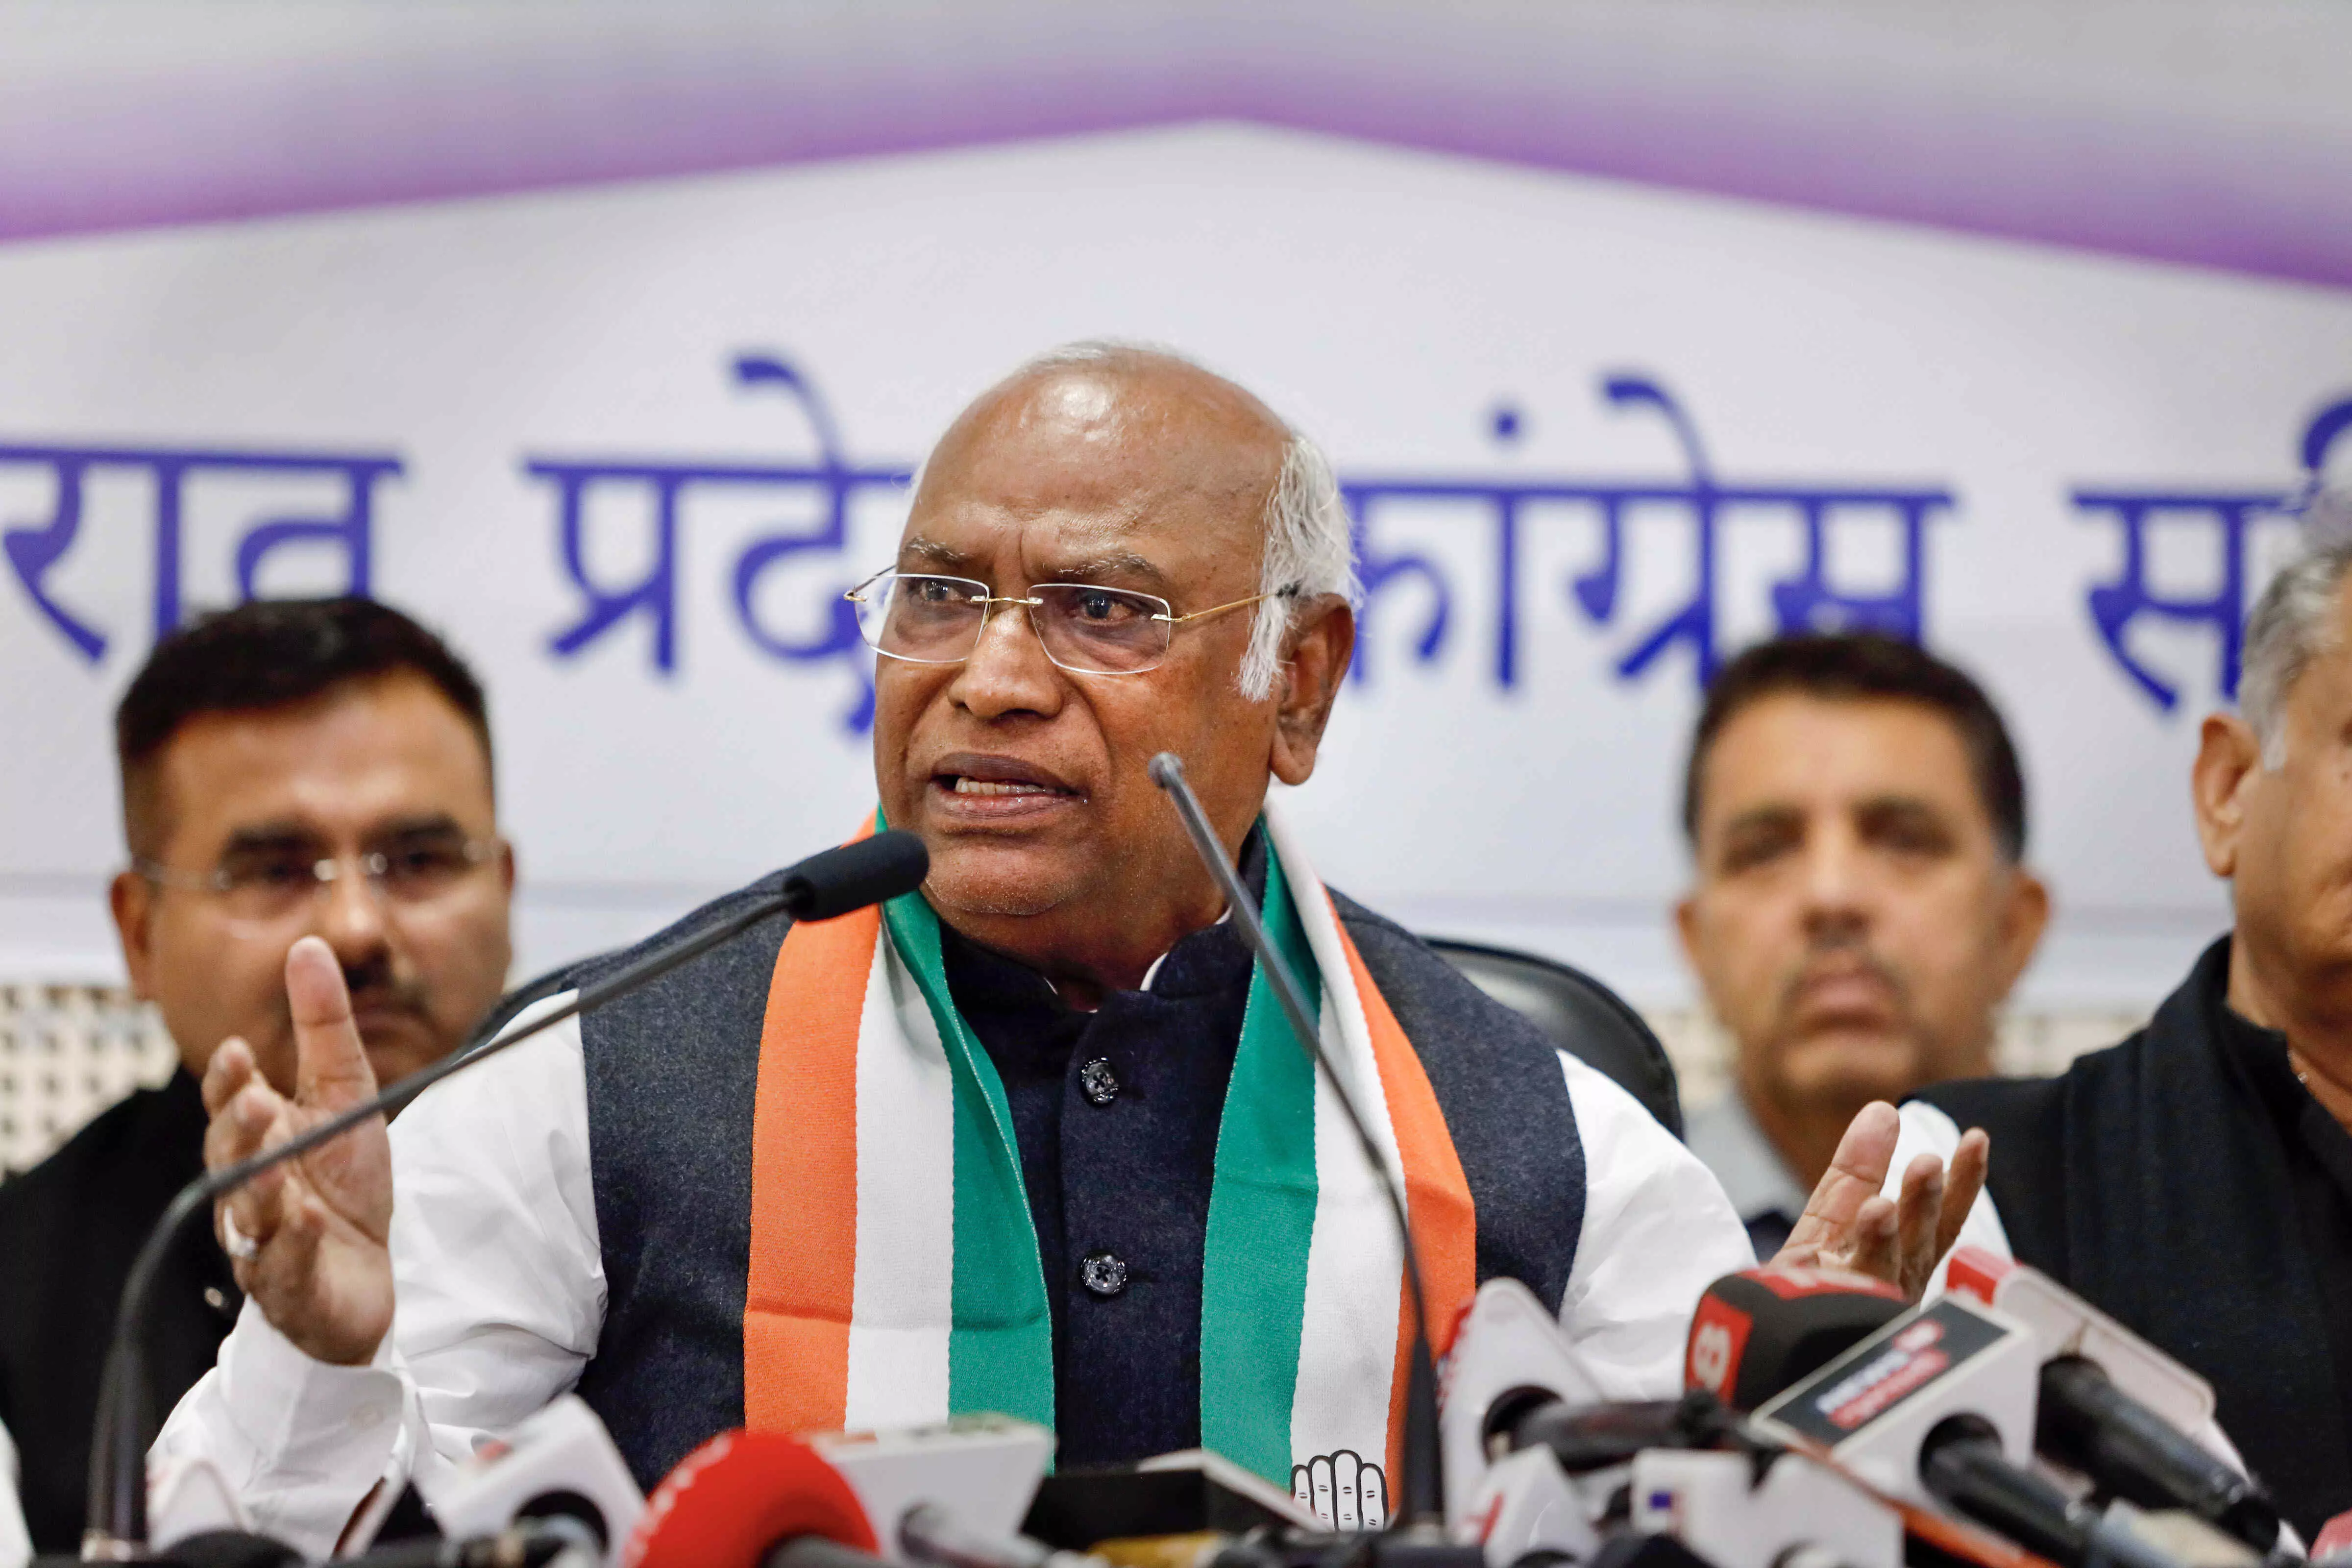 If Cong retains govt in Rajasthan, it will come to power at Centre in 2024: Mallikarjun Kharge